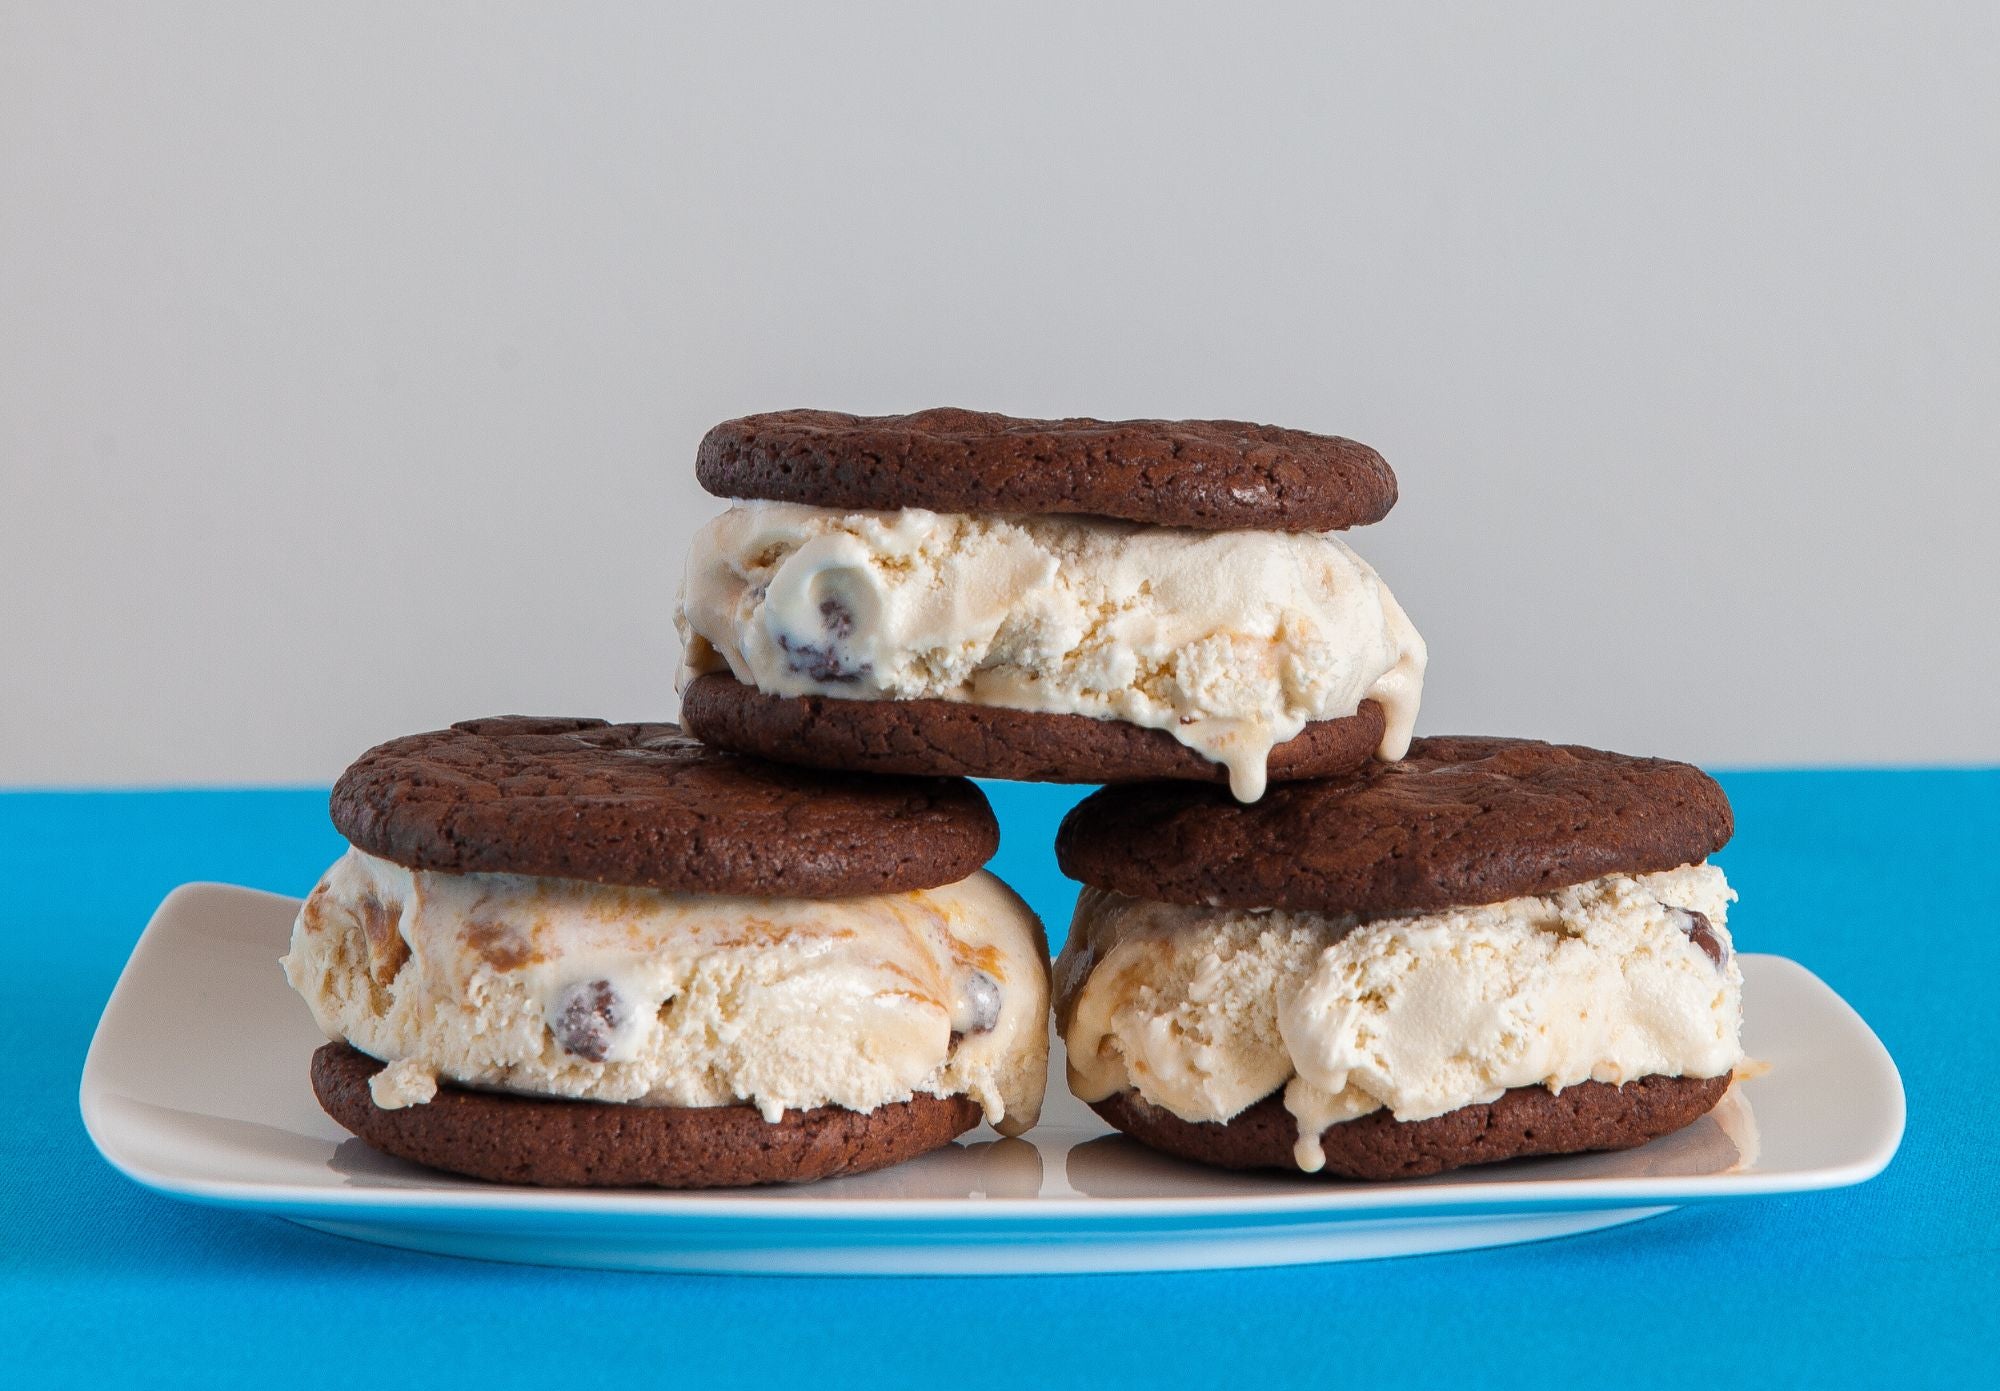 A Joyful Celebration of National Ice Cream Sandwich Day: Create Your Own Blissful Treats at Home!